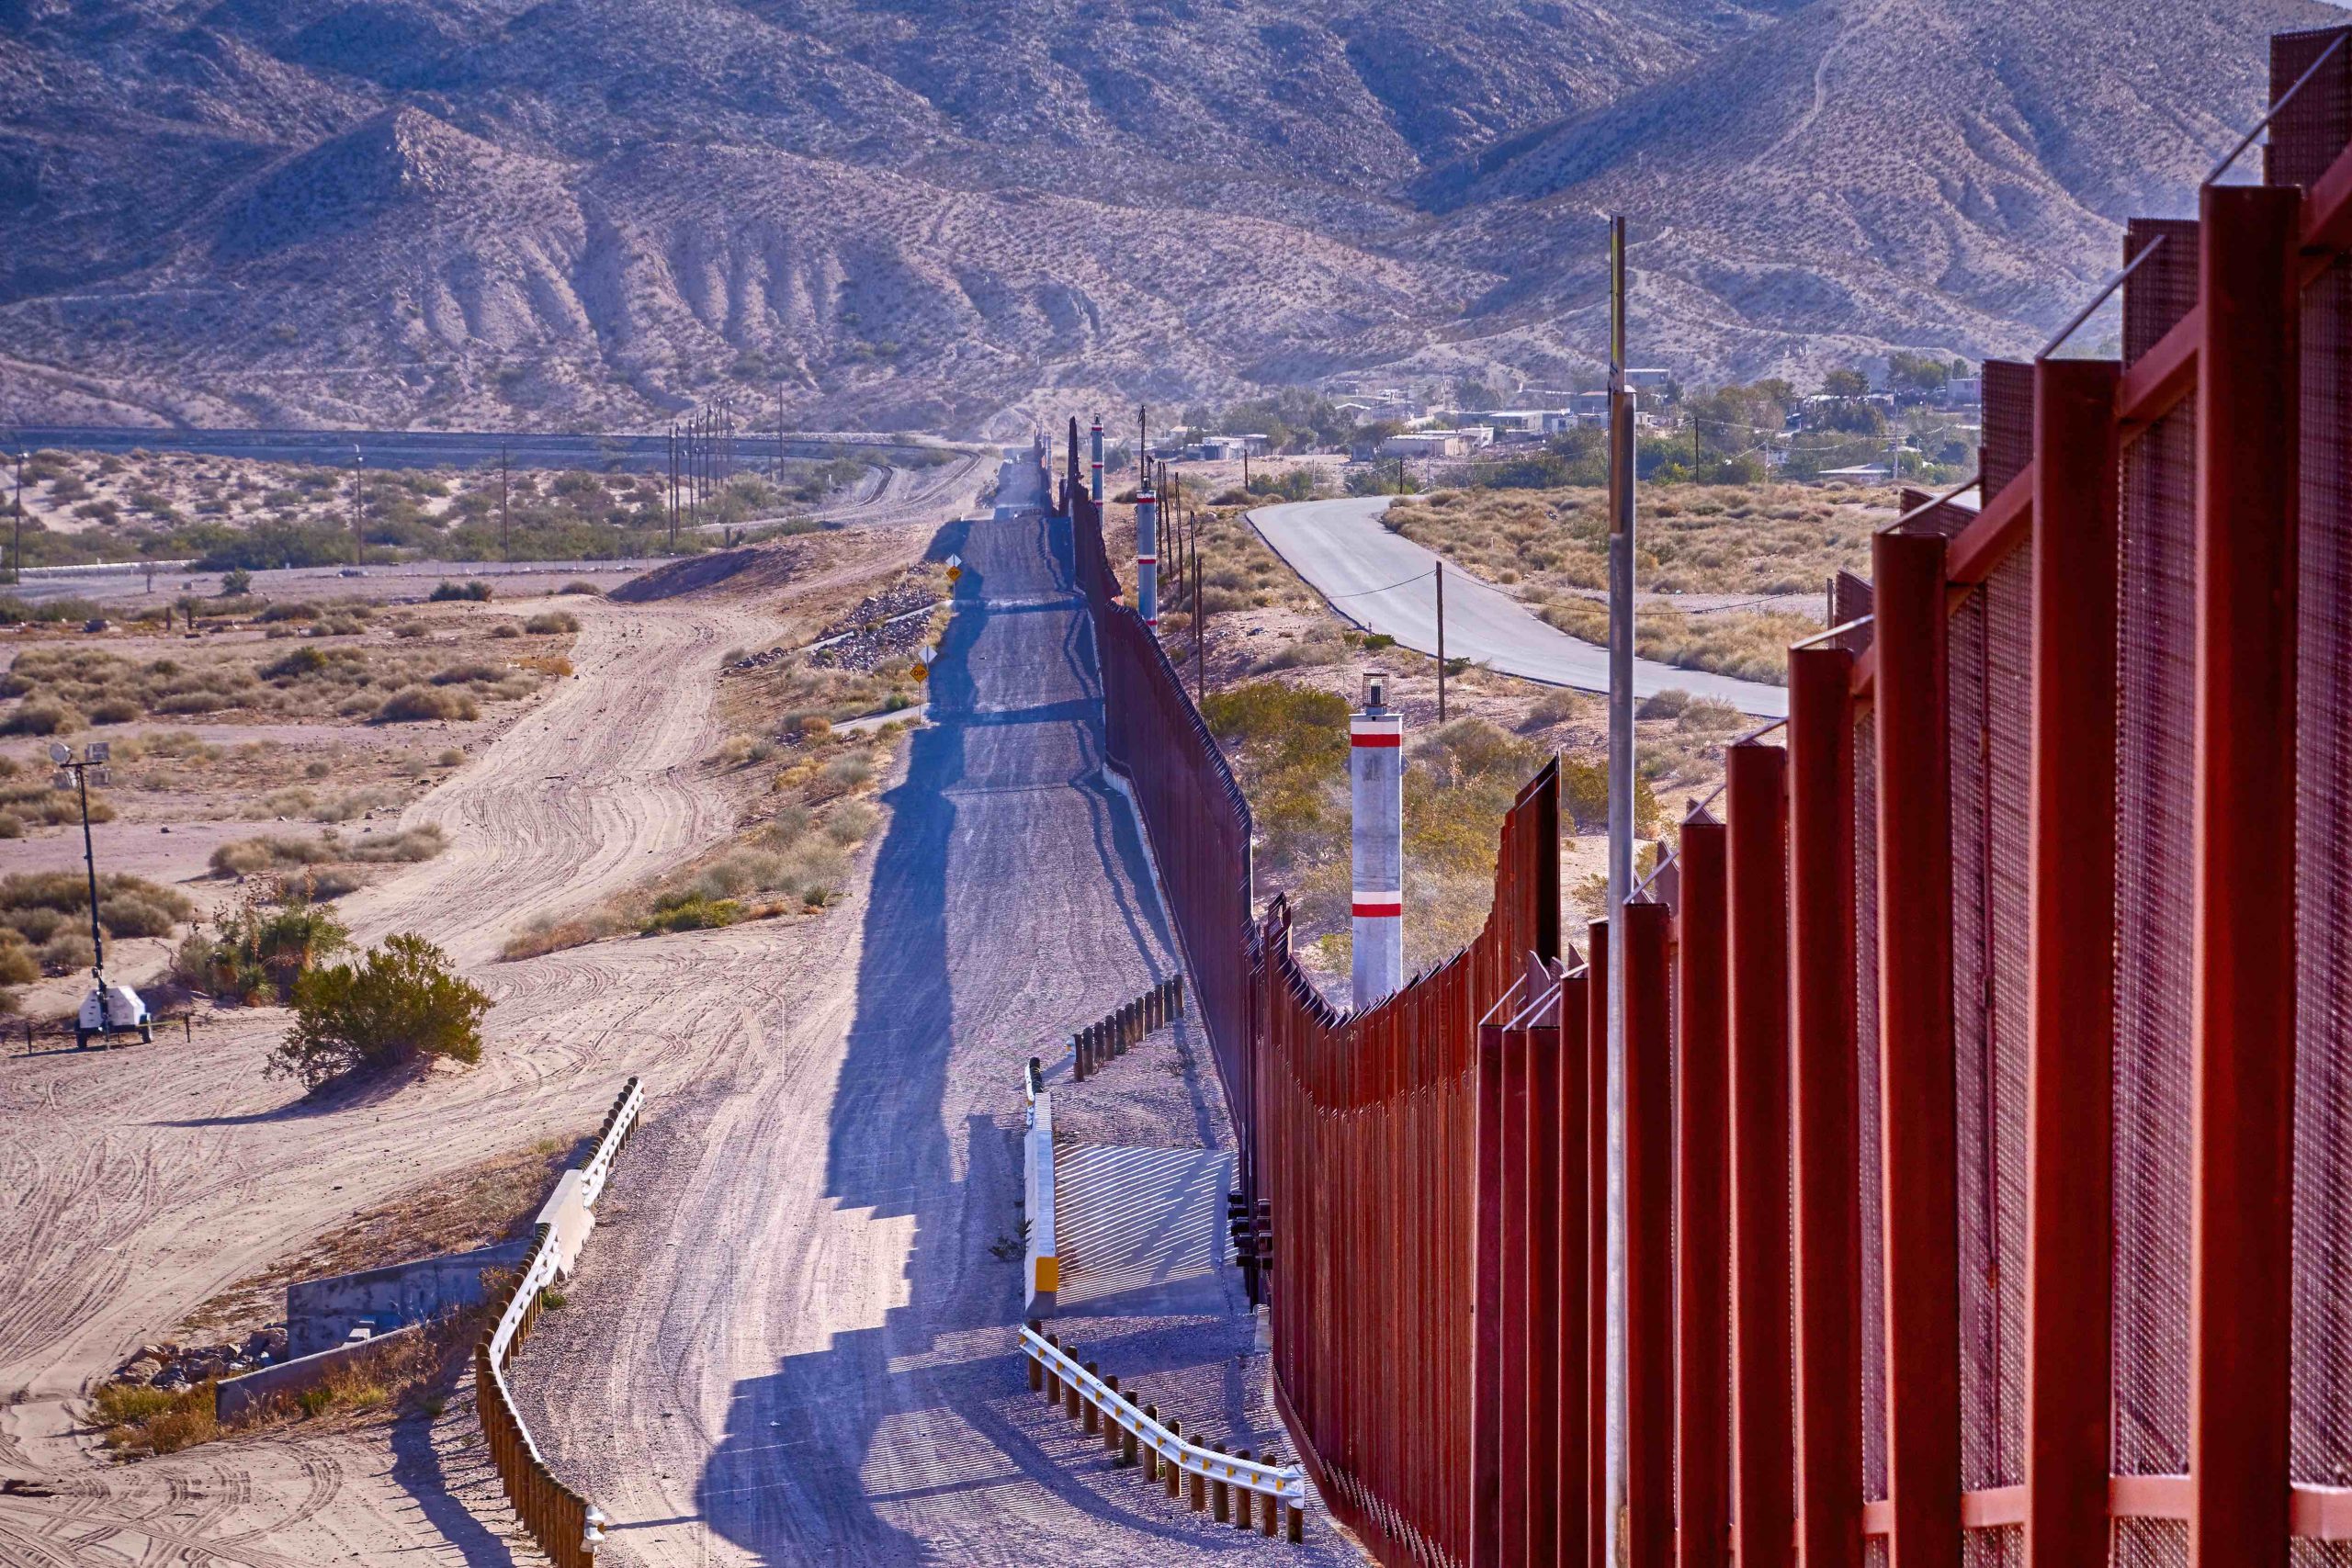 Border fence cutting through a desert with hills in the background